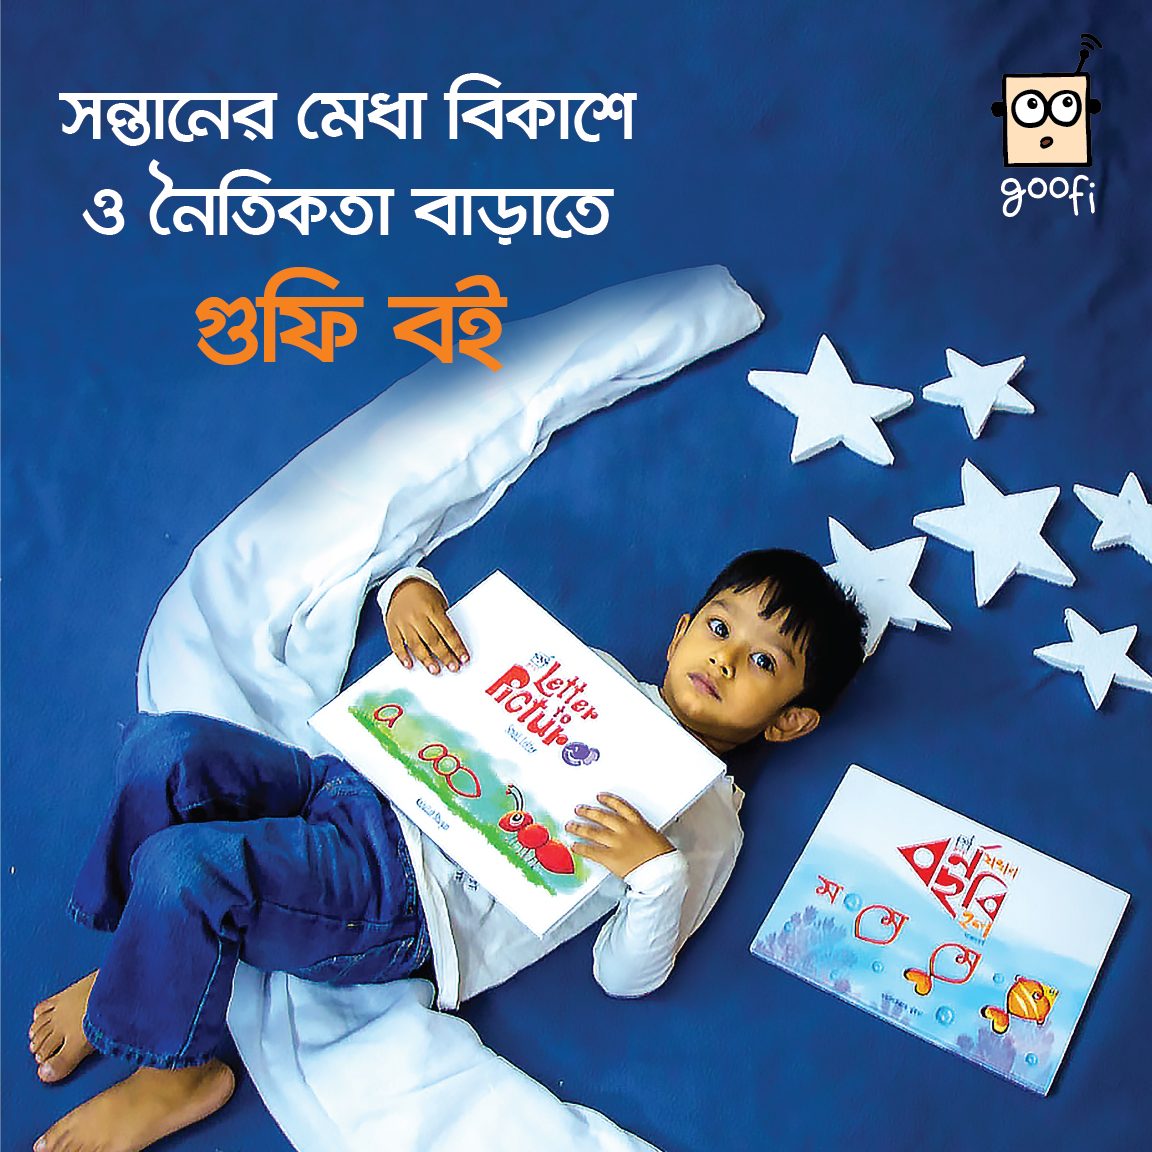 Kids Time - Brand Promotion Campaign Post 06 1X1